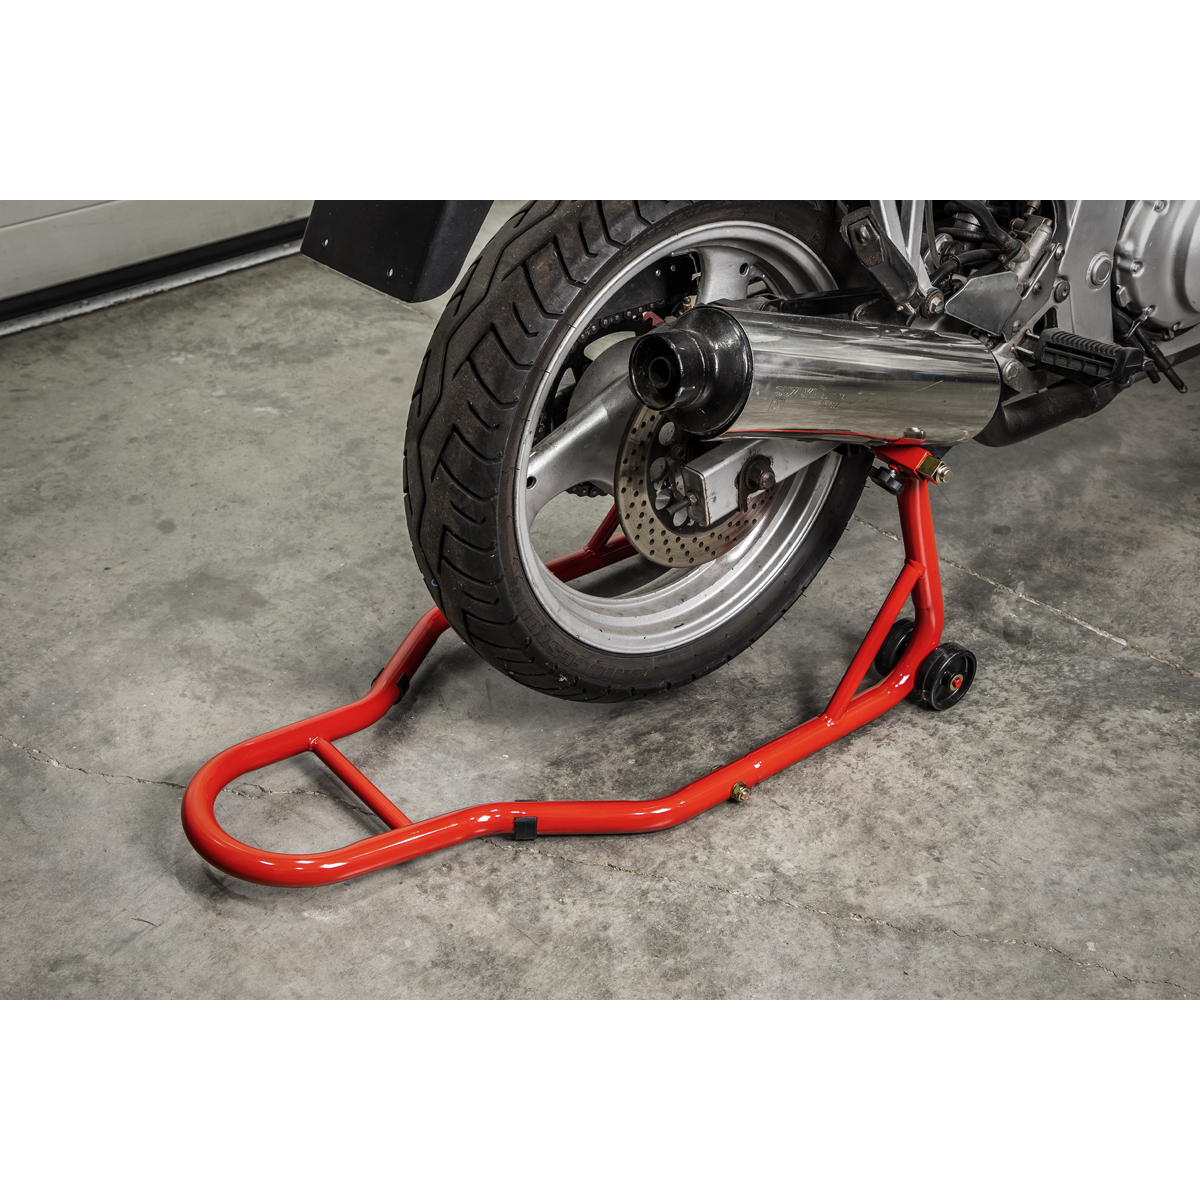 Sealey Universal Rear Motorcycle wheel Paddock Stand with Rubber Supports RPS2KD